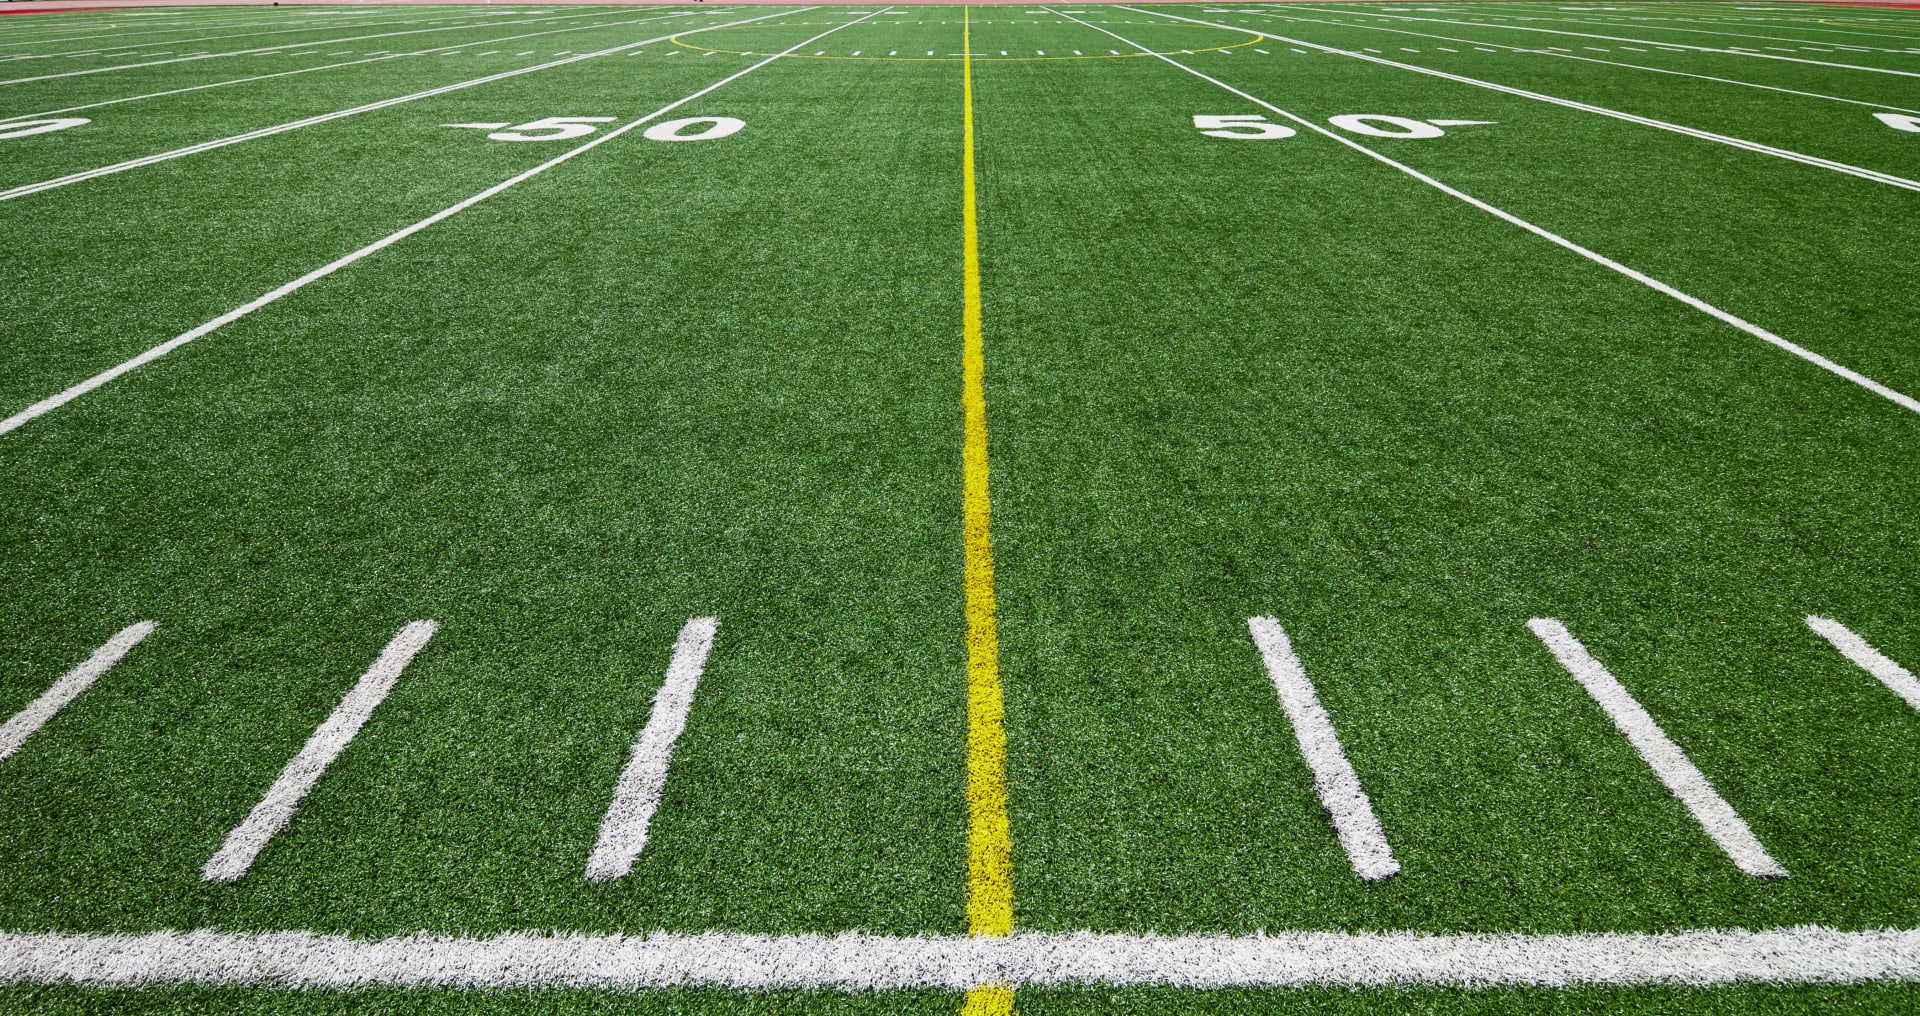 Football field showing numbers by 10, which end in IG in German and will be pronounced with a soft CH sound.